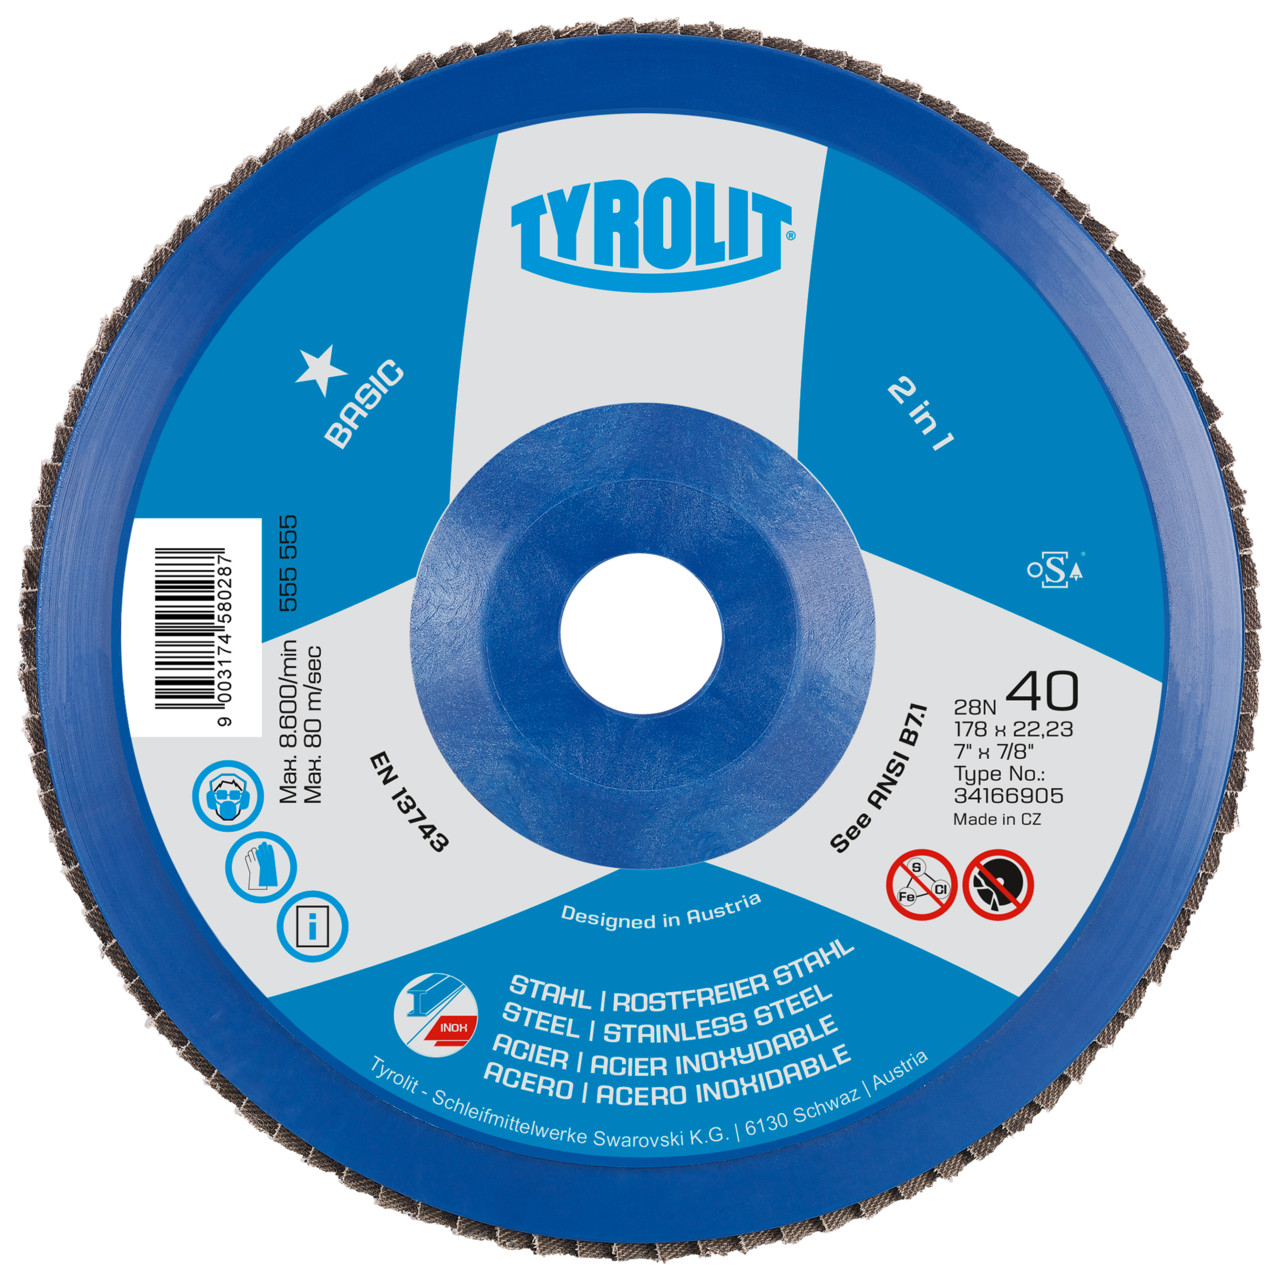 Tyrolit Serrated lock washer DxH 125x22.23 2in1 for steel &amp; stainless steel, P120, shape: 28N - straight version (plastic carrier body), Art. 34318576